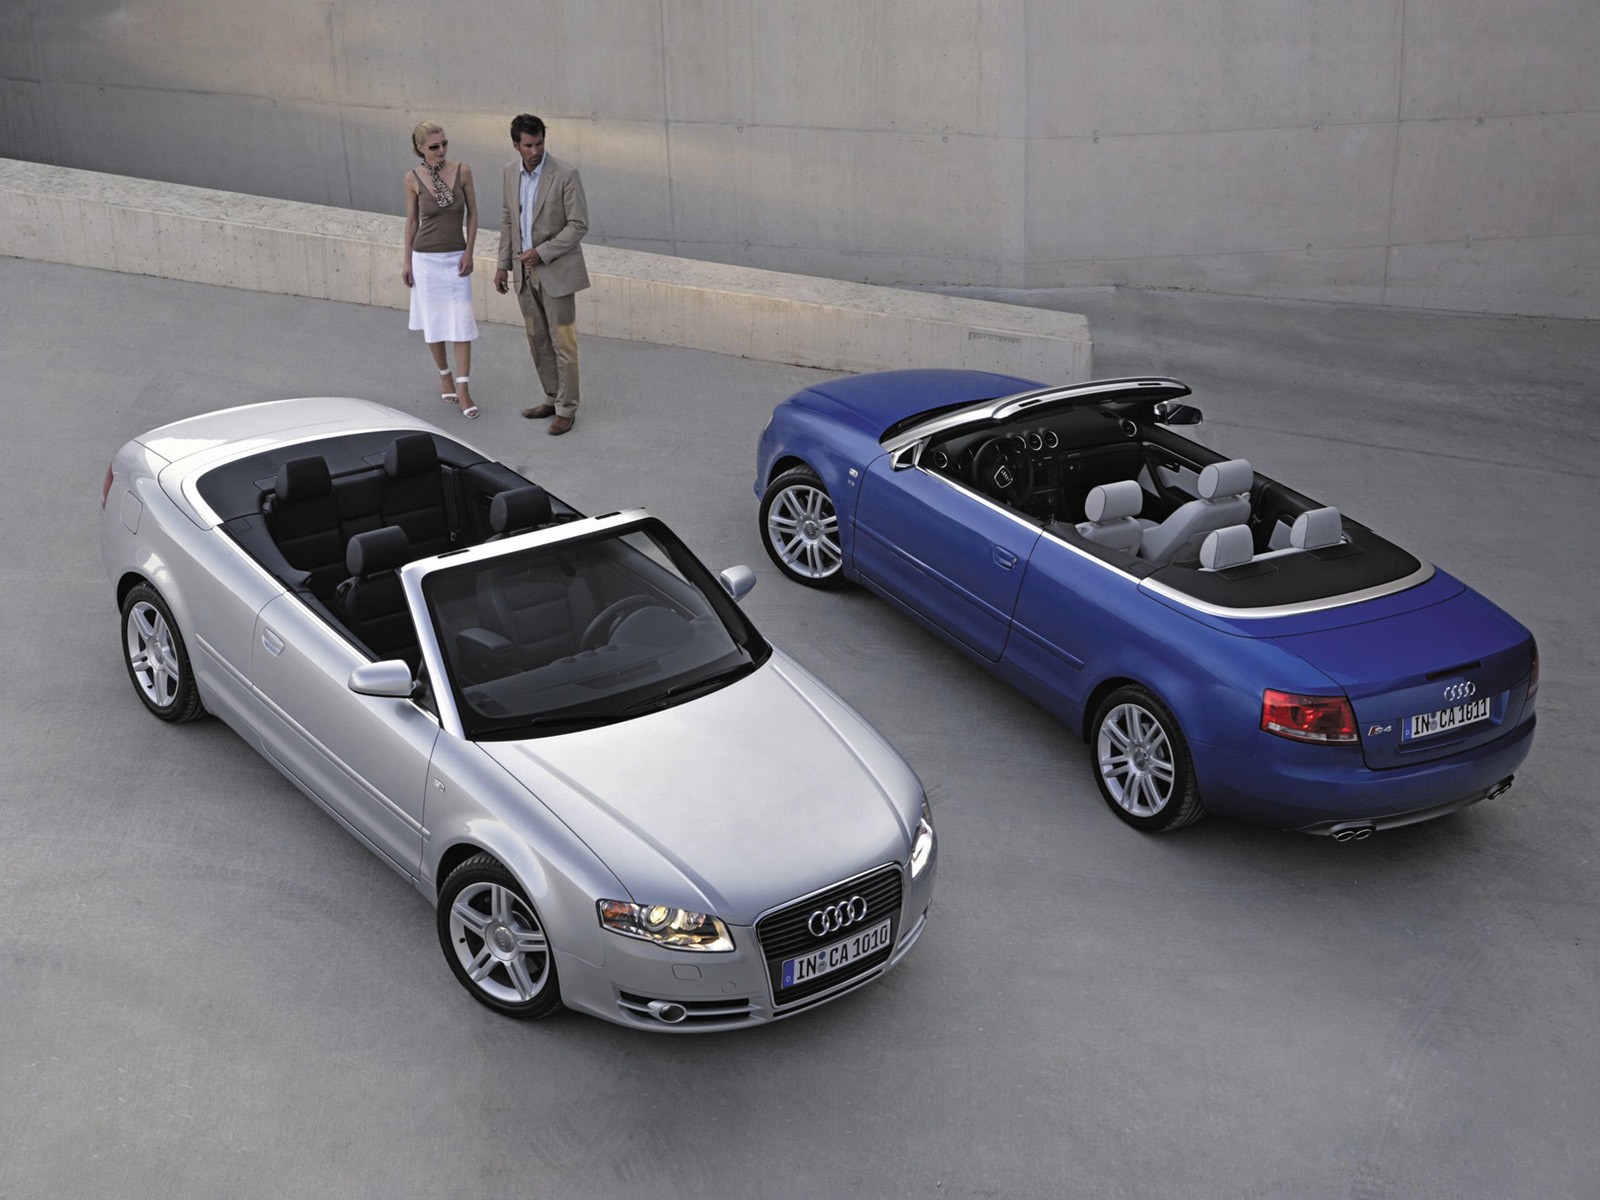 audi-rumored-to-debut-a1-cabriolet-in-2019-a4-coupe-and-a4-cabriolet-to-follow_4.jpg